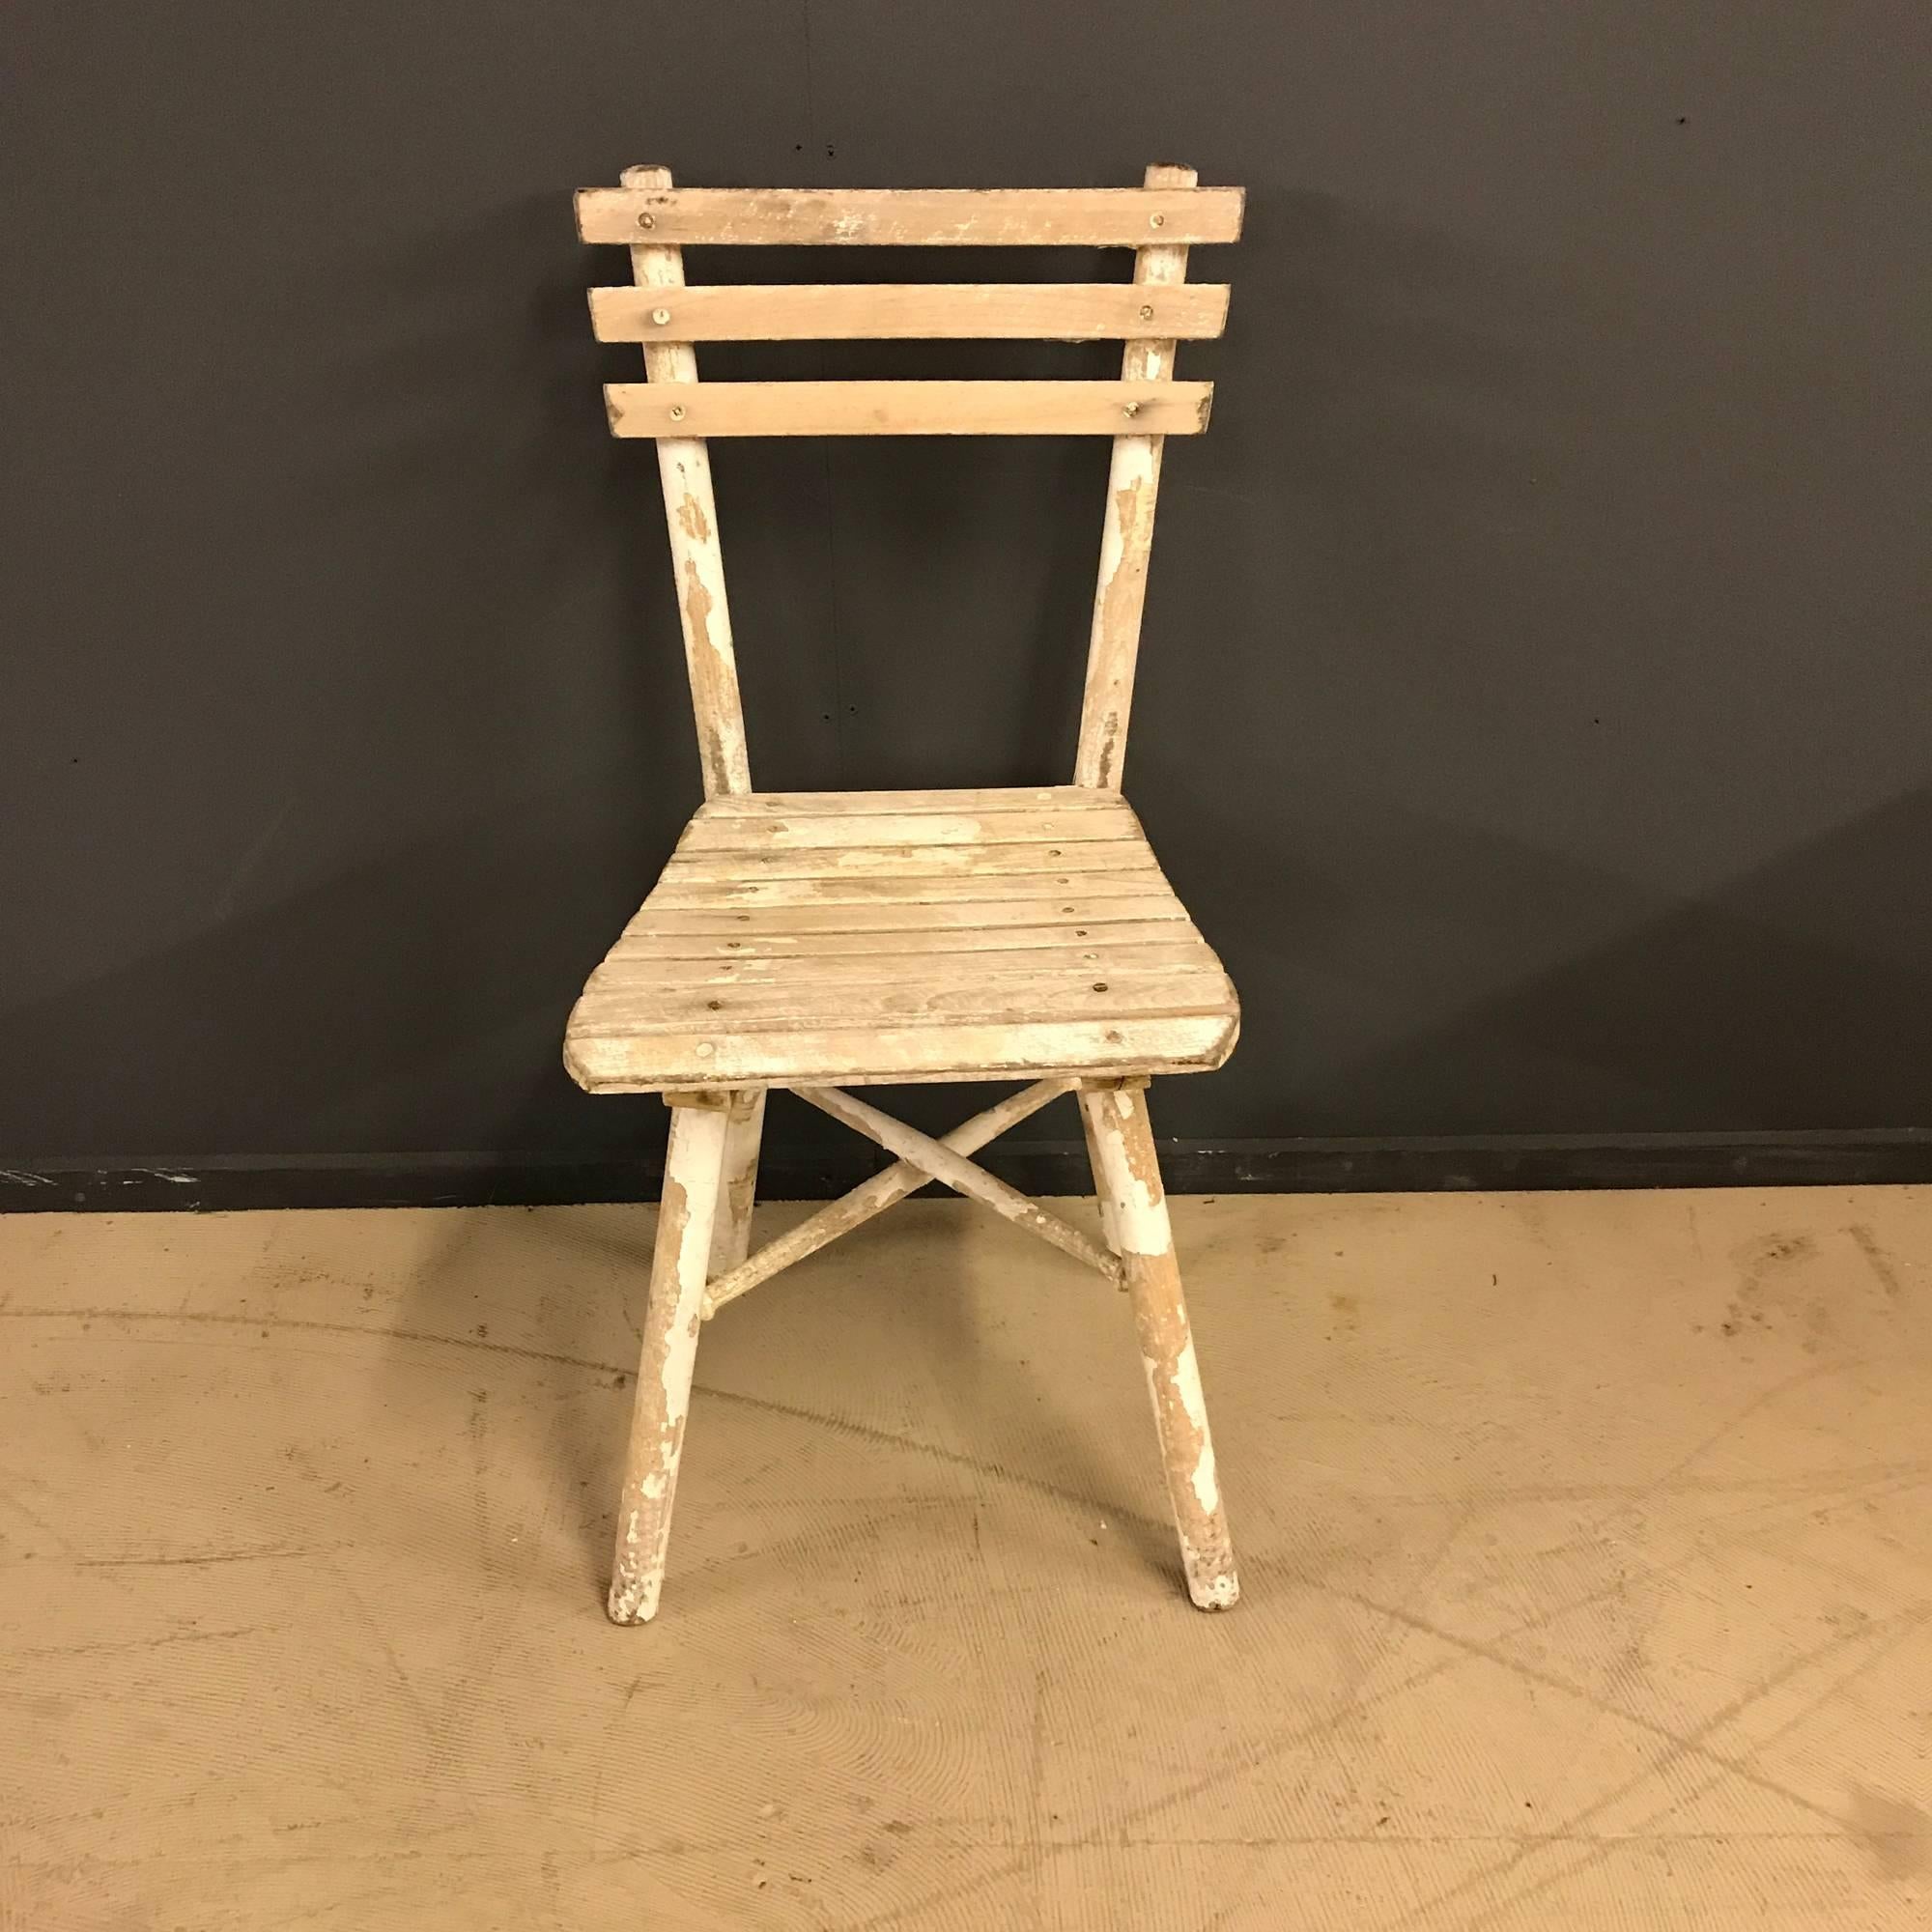 White painted oak wooden chair.
Nice distressed original paint.
This chair remains in good condition.